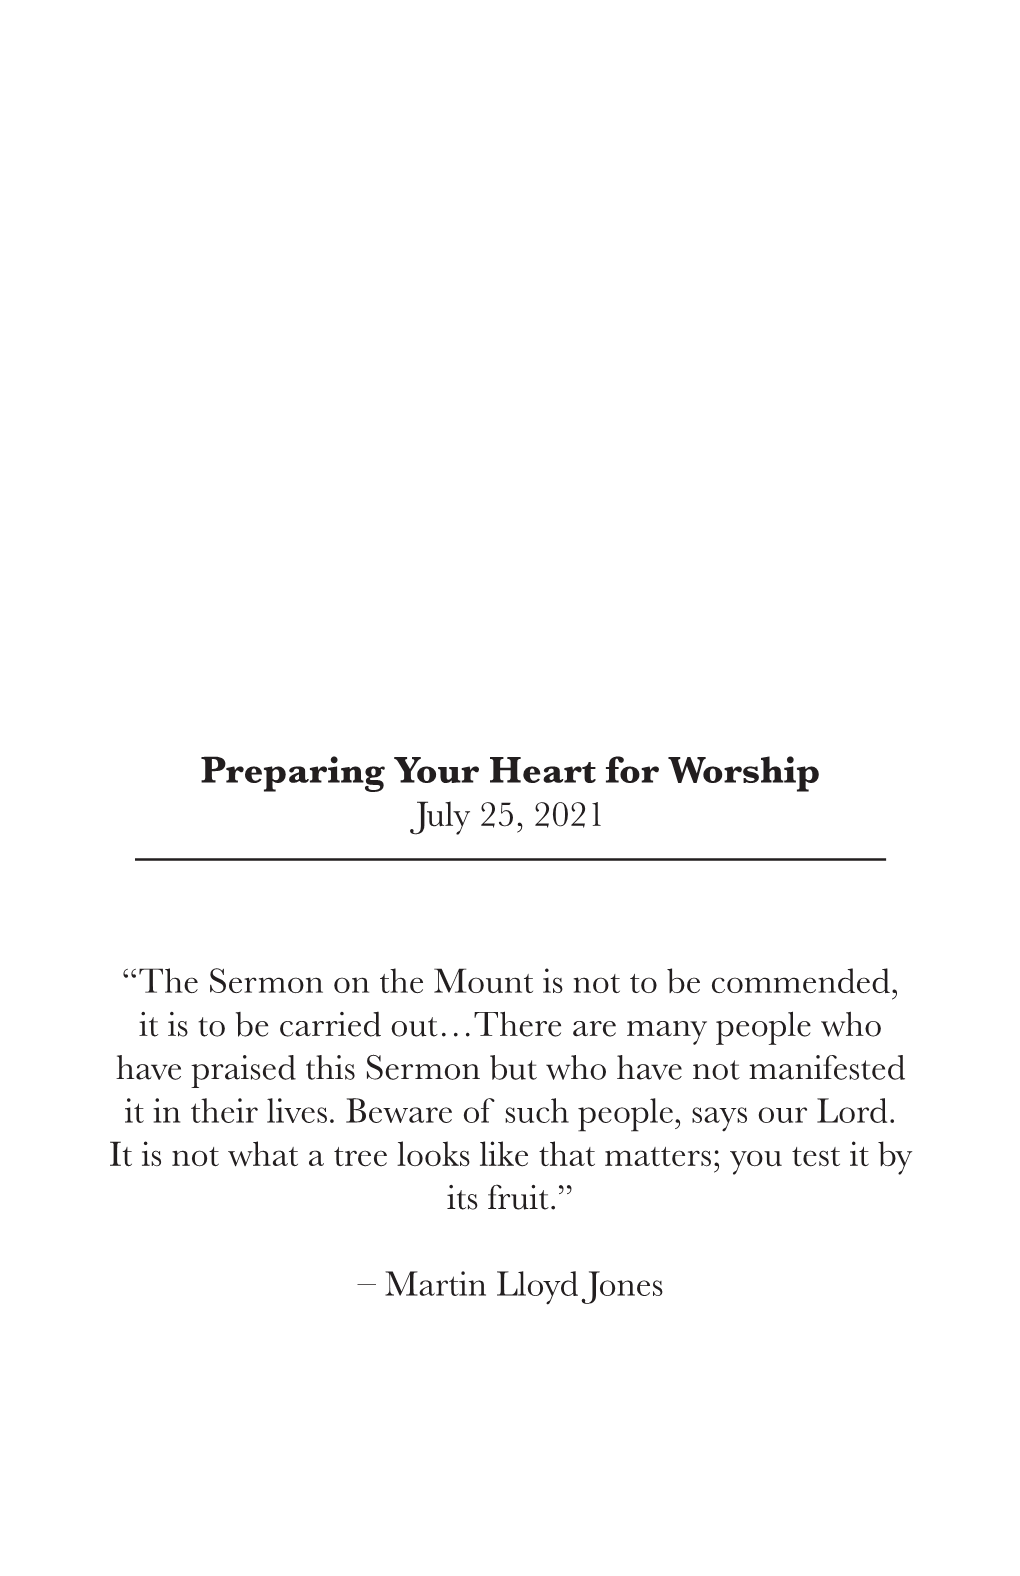 Preparing Your Heart for Worship July 25, 2021